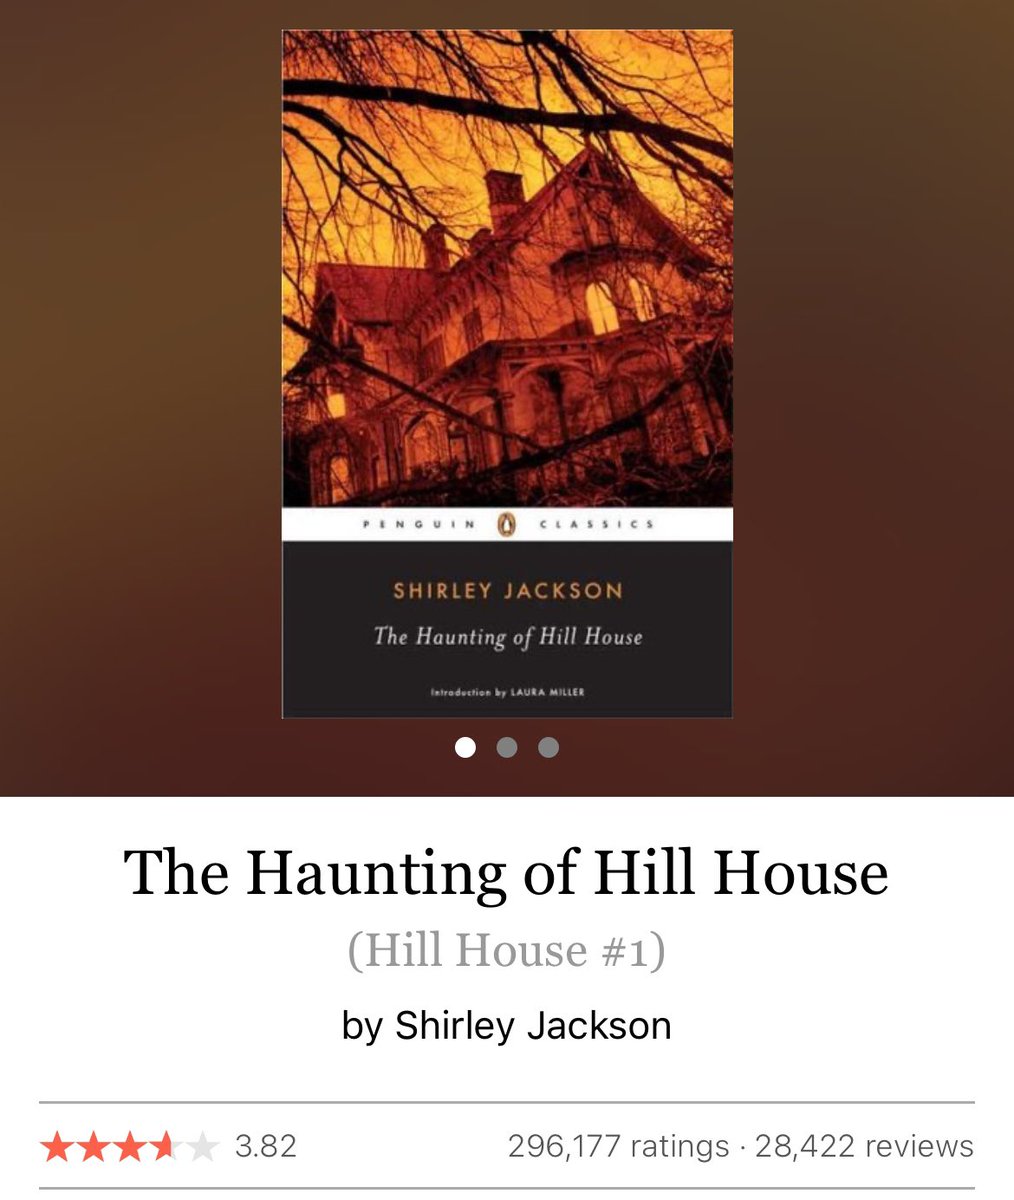 This is a reminder that The Haunting of Hill by Shirley Jackson is a 3.82 on Goodreads.